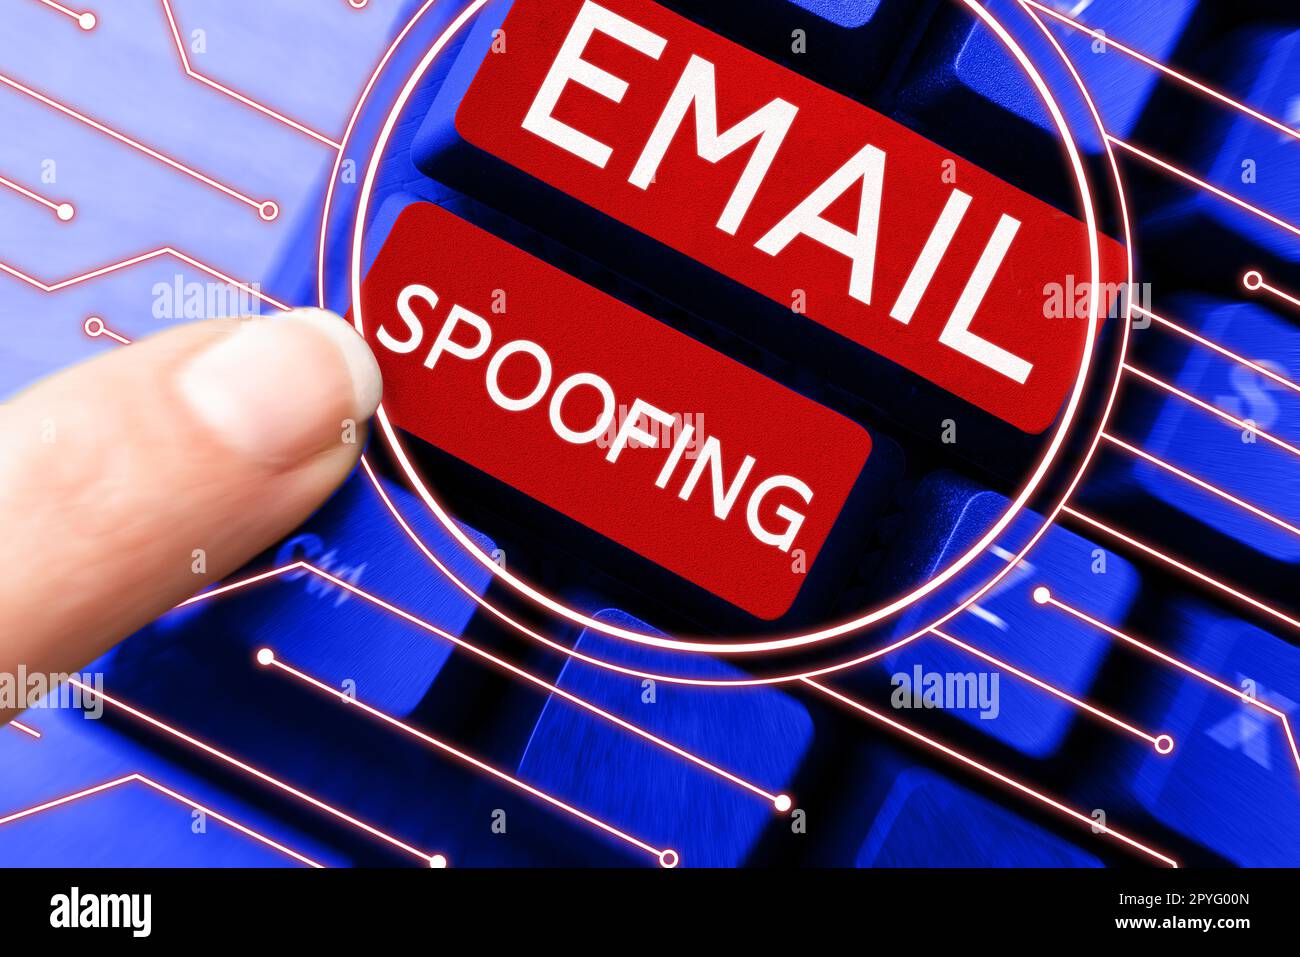 Handwriting text Email Spoofing. Business idea secure the access and content of an email account or service Stock Photo